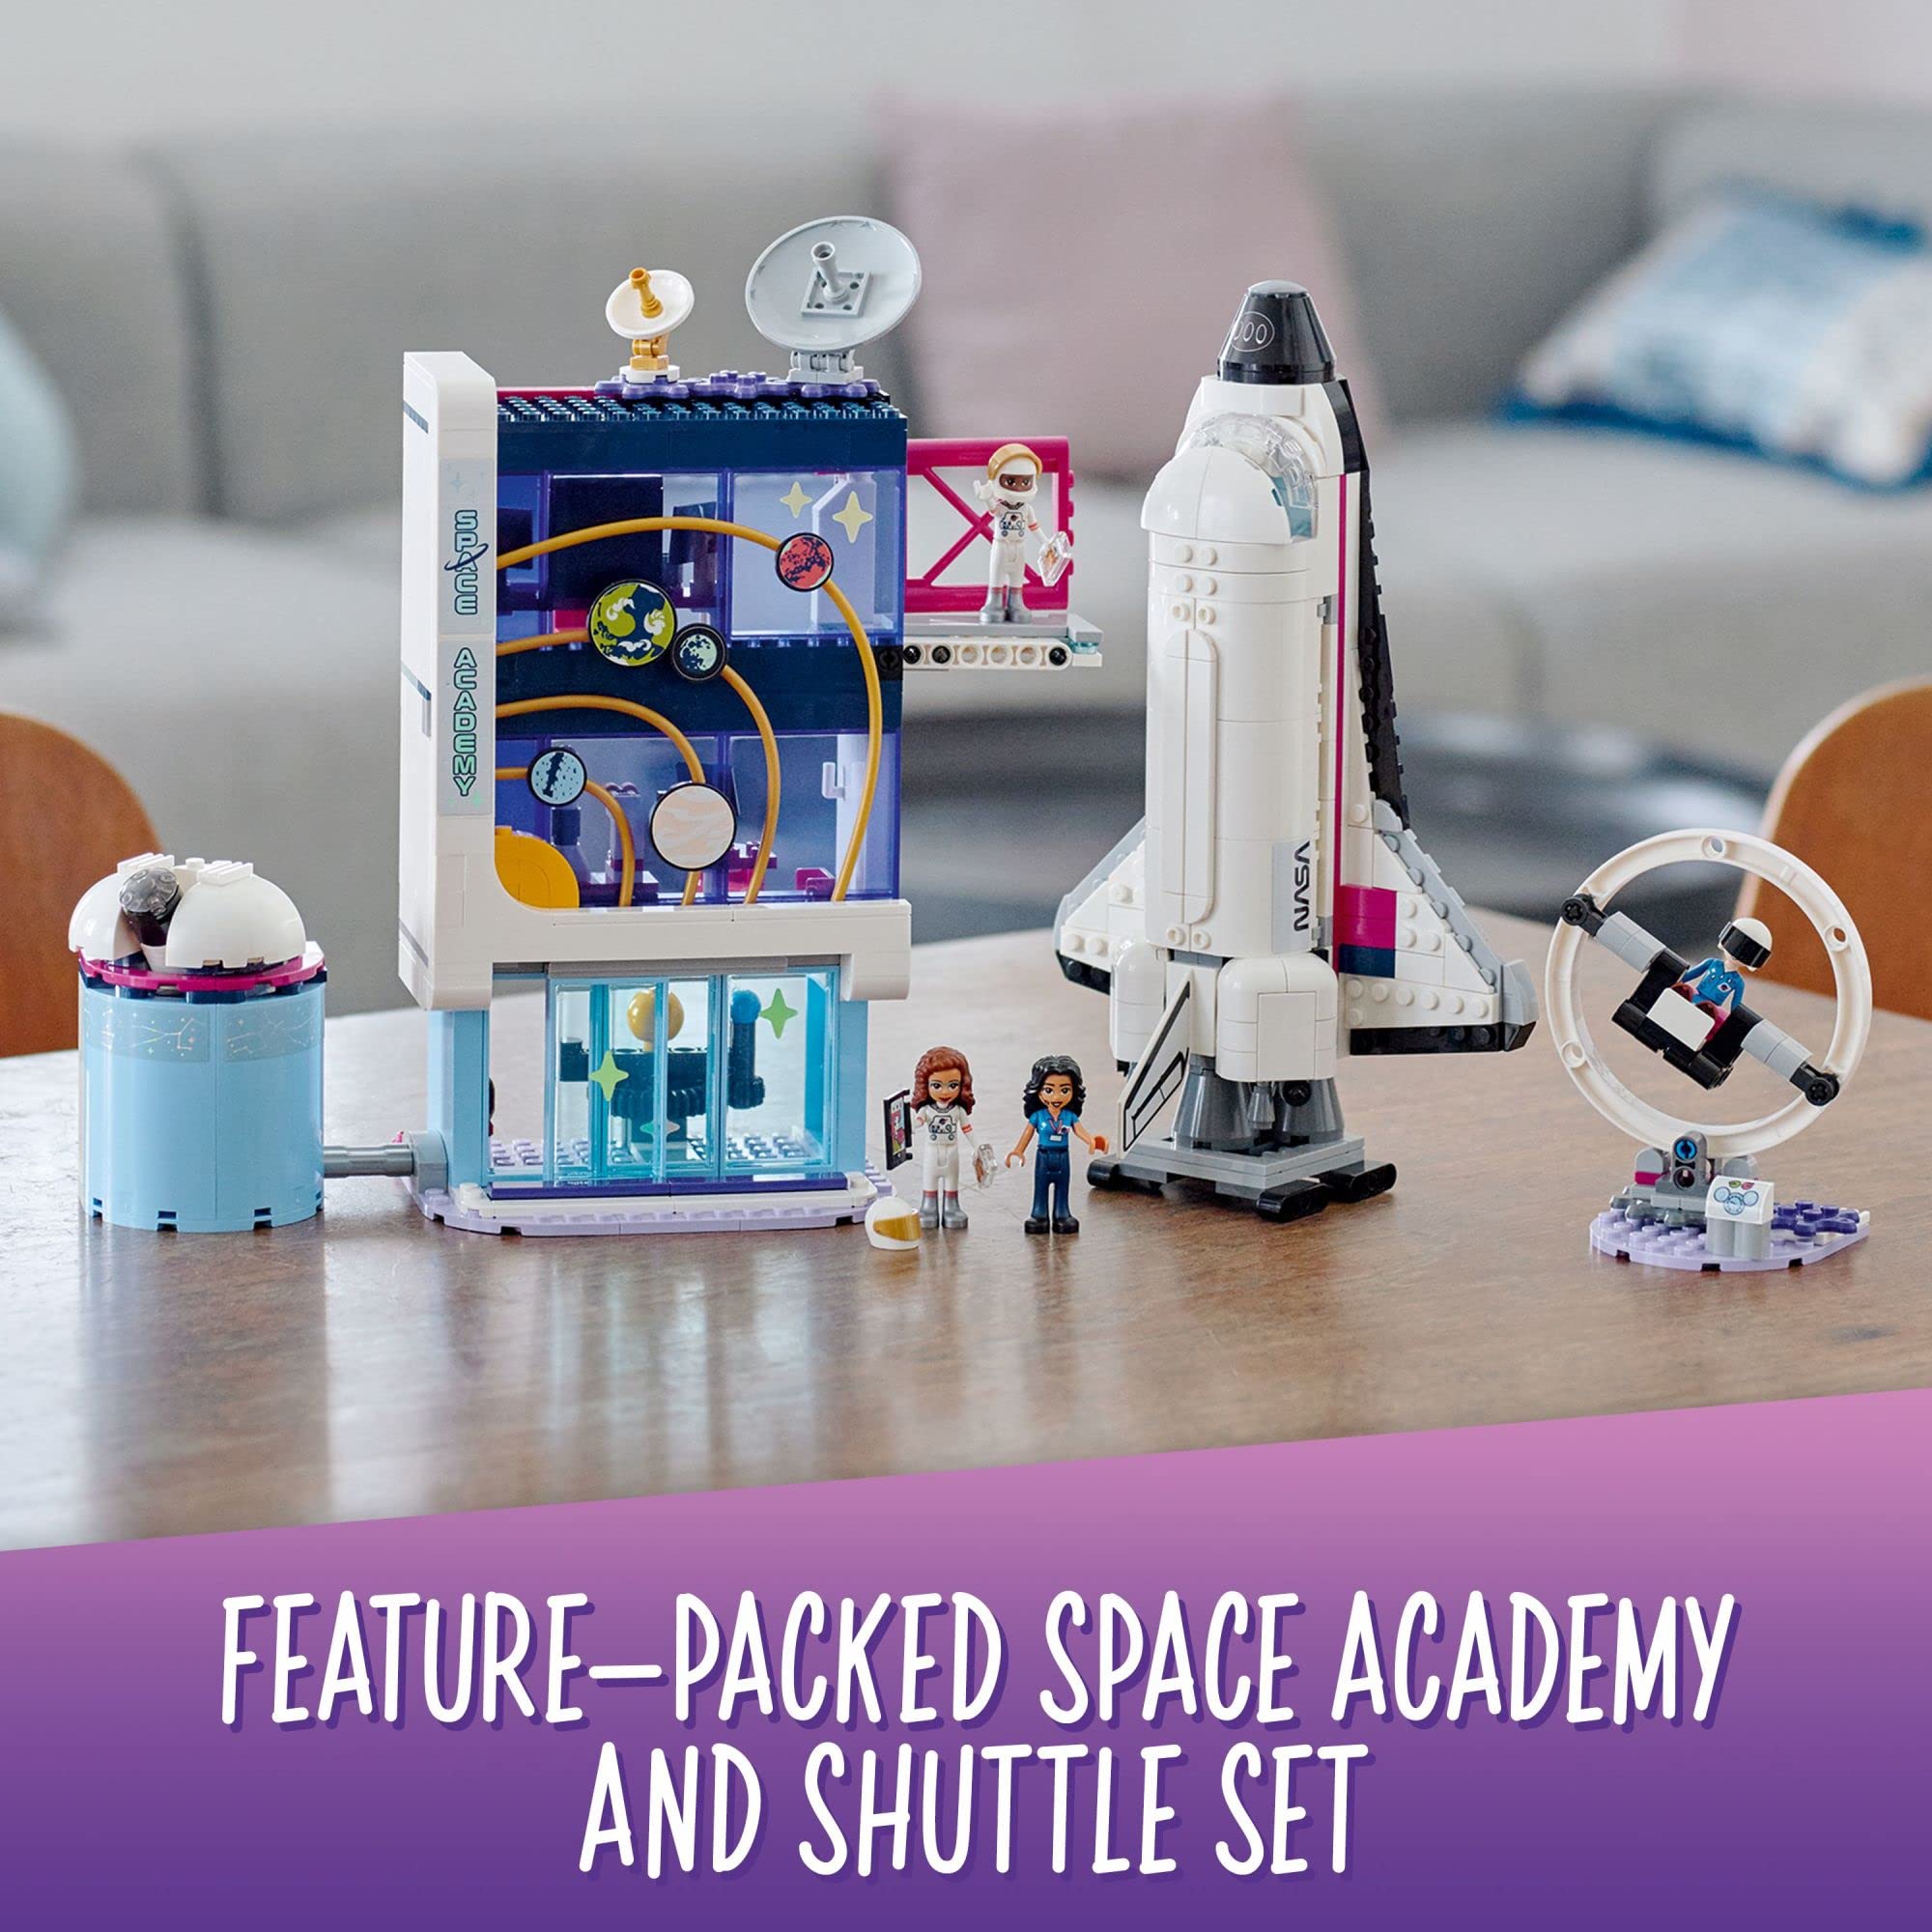 LEGO Friends Olivia’s Space Academy Shuttle Rocket 41713, NASA Space Shuttle Toy for Kids, Pretend Play Space Academy with Astronaut Mini Figures, Gift for Boys Girls 8+ Years Old